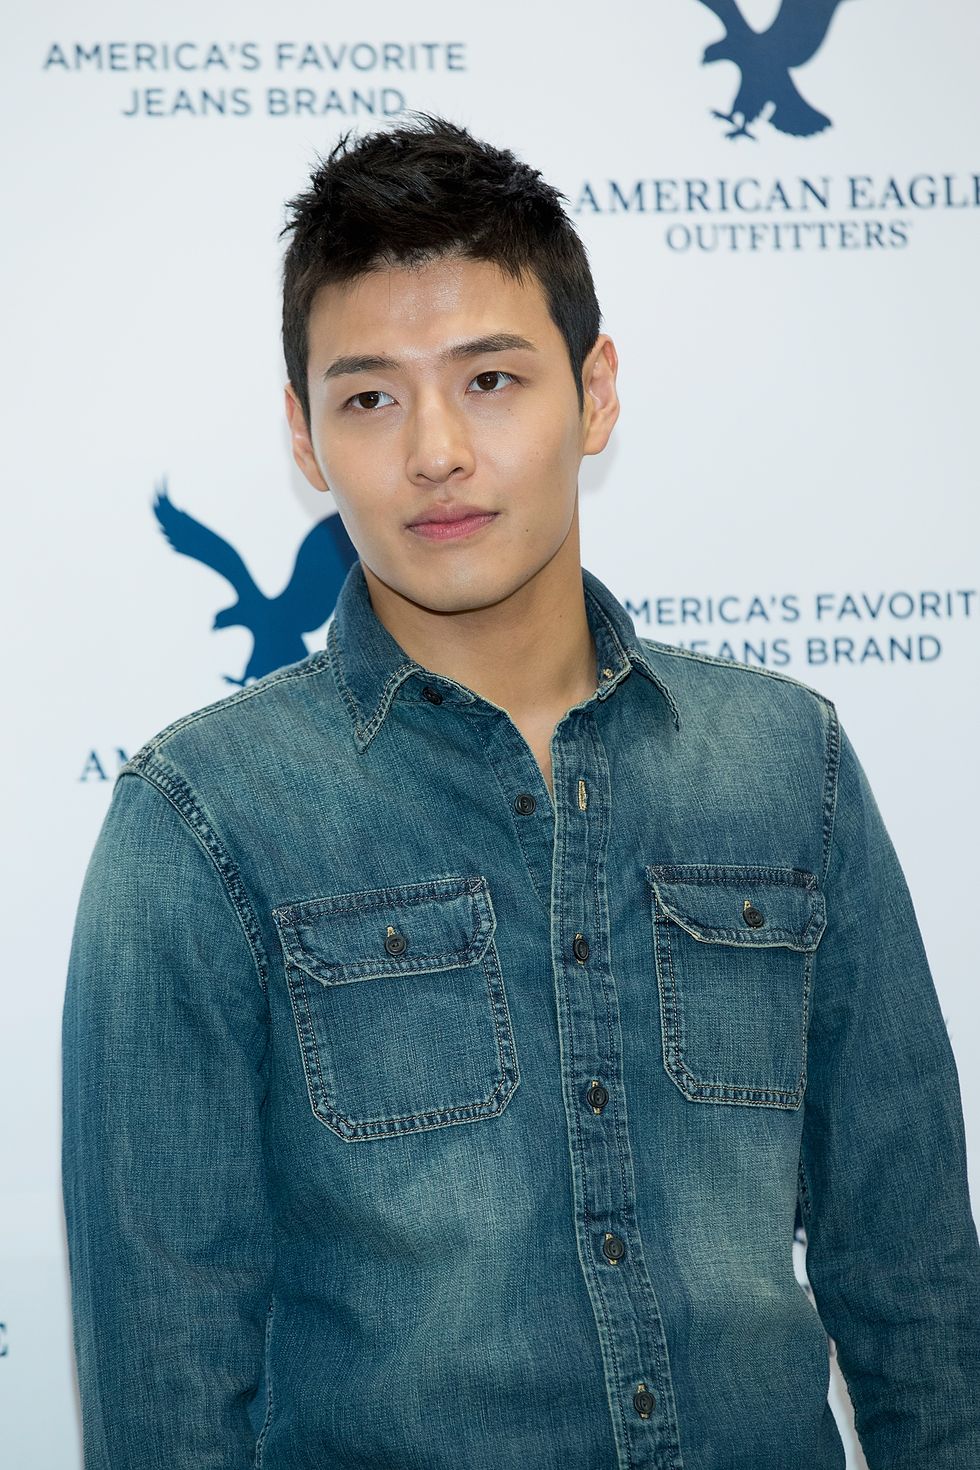 seoul, south korea   july 17  south korean actor kang ha neul attends the opening event for american eagle outfitters at lotte department store on july 17, 2015 in seoul, south korea  photo by han myung guwireimage